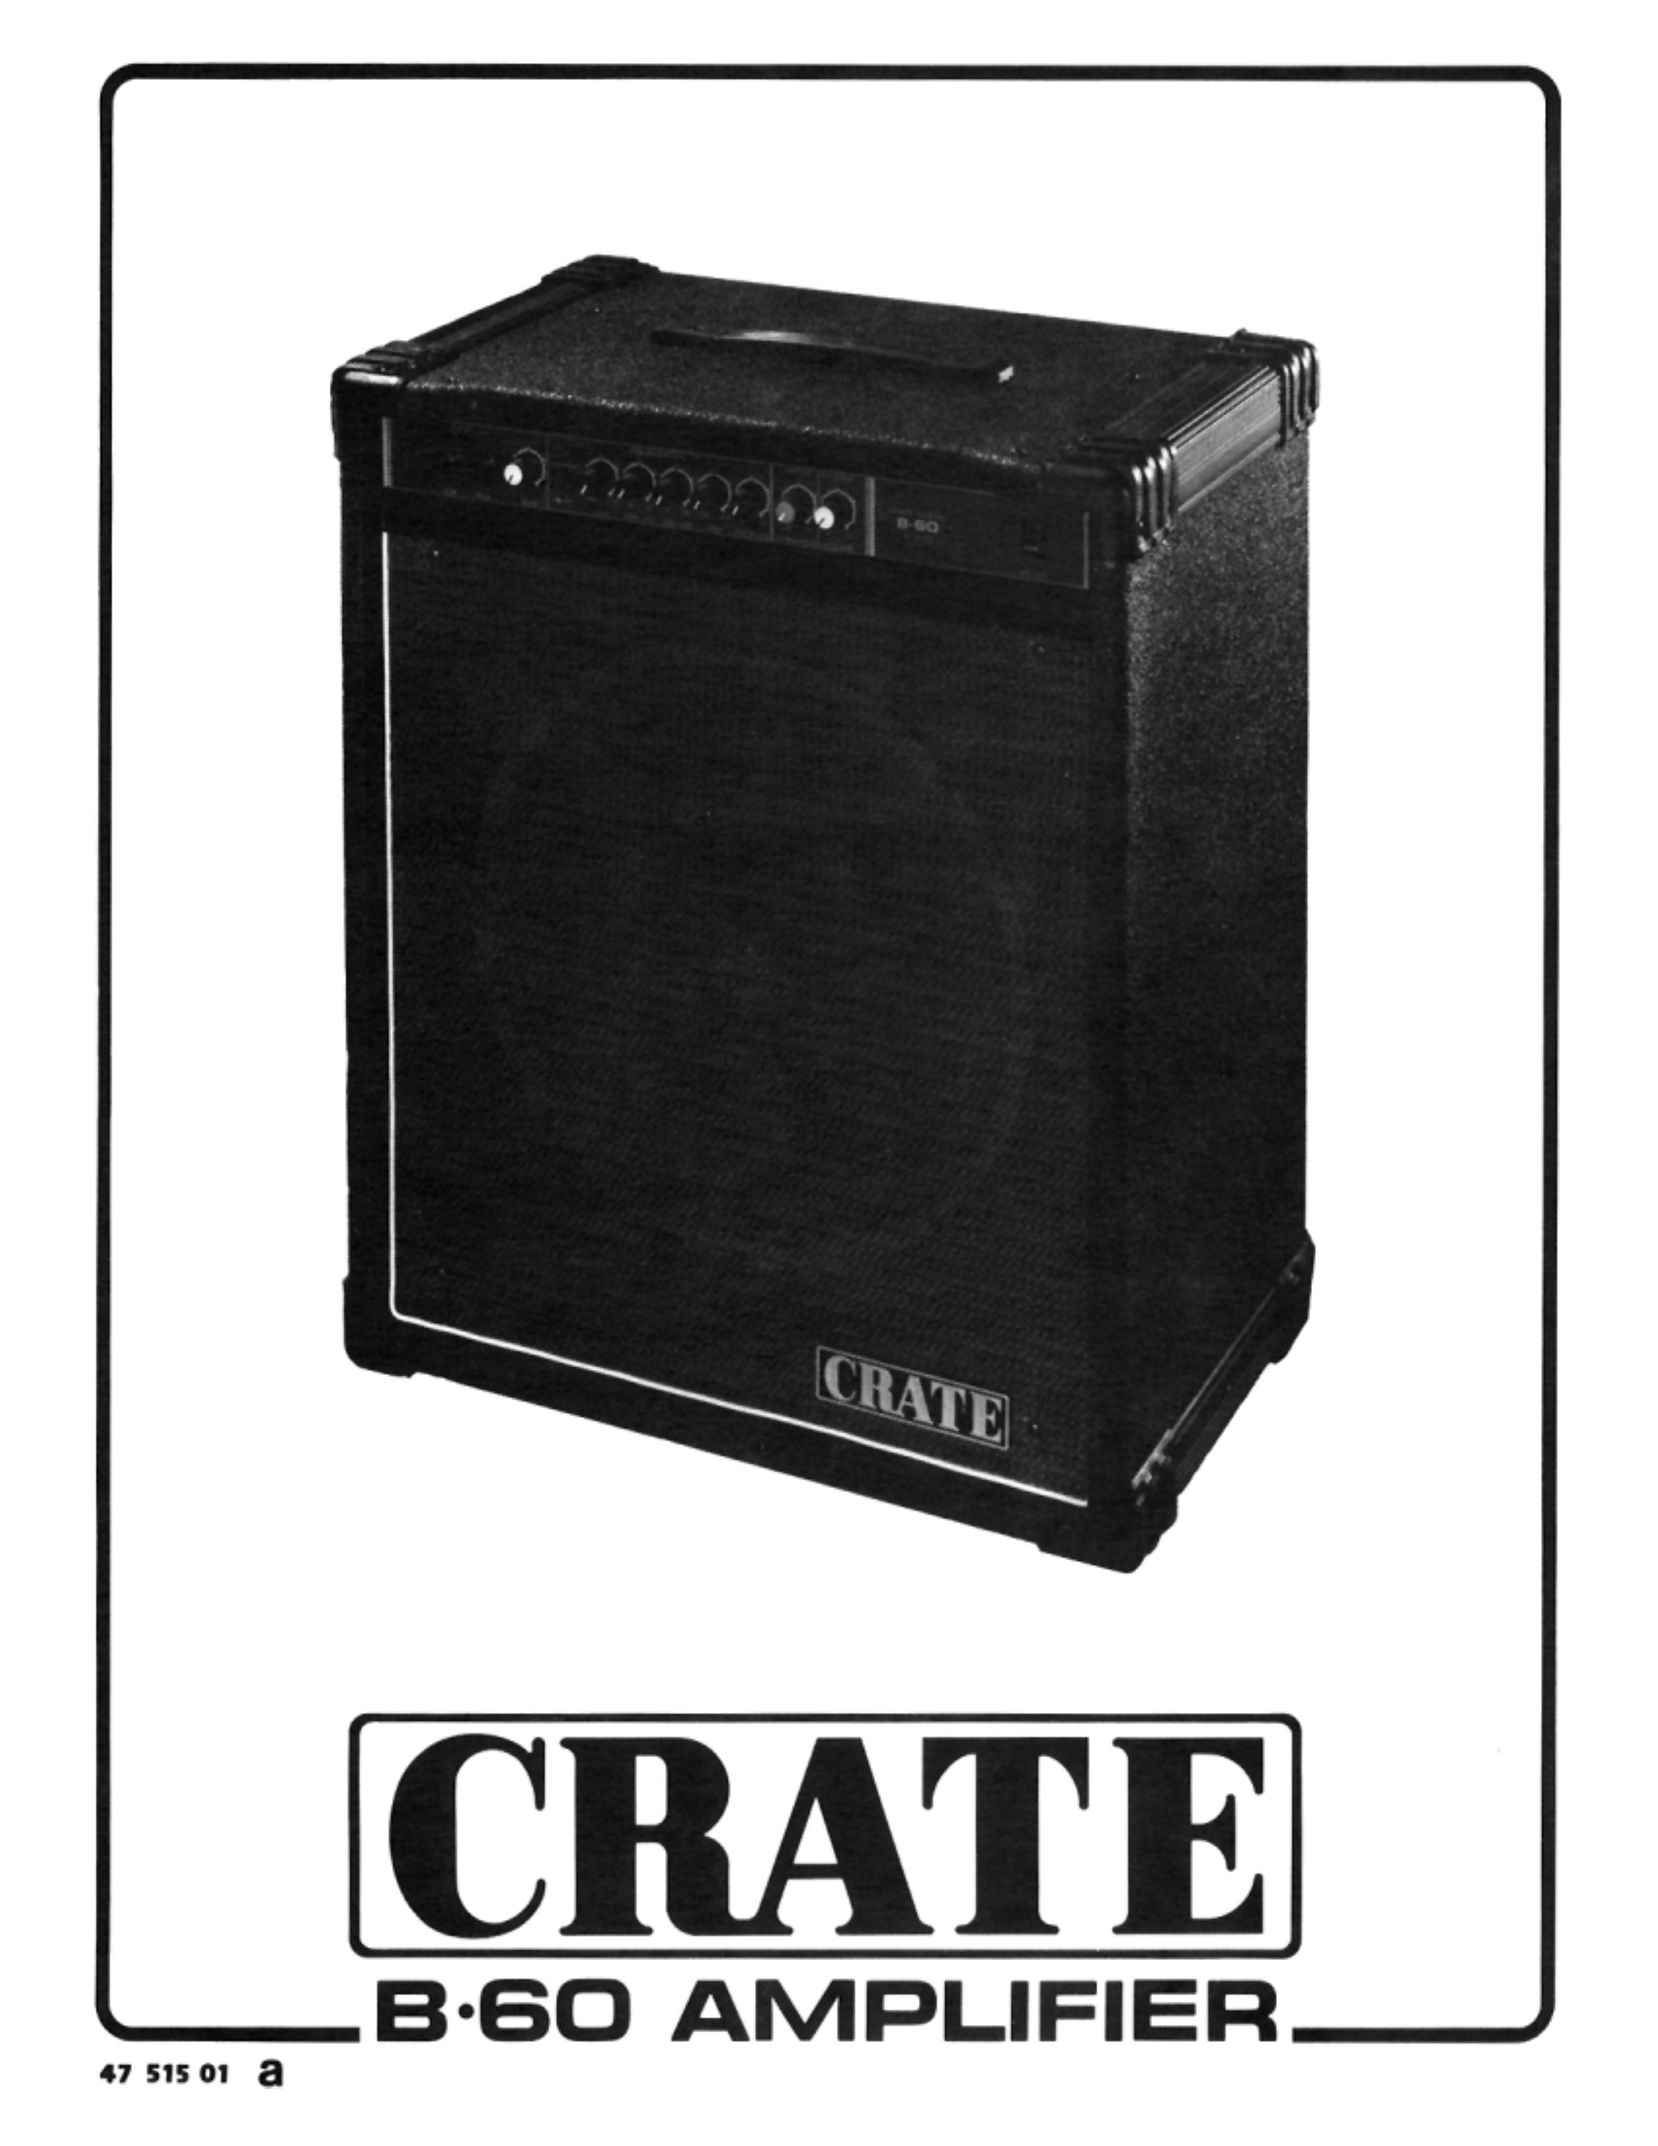 Crate Amplifiers B.60 Stereo Amplifier User Manual